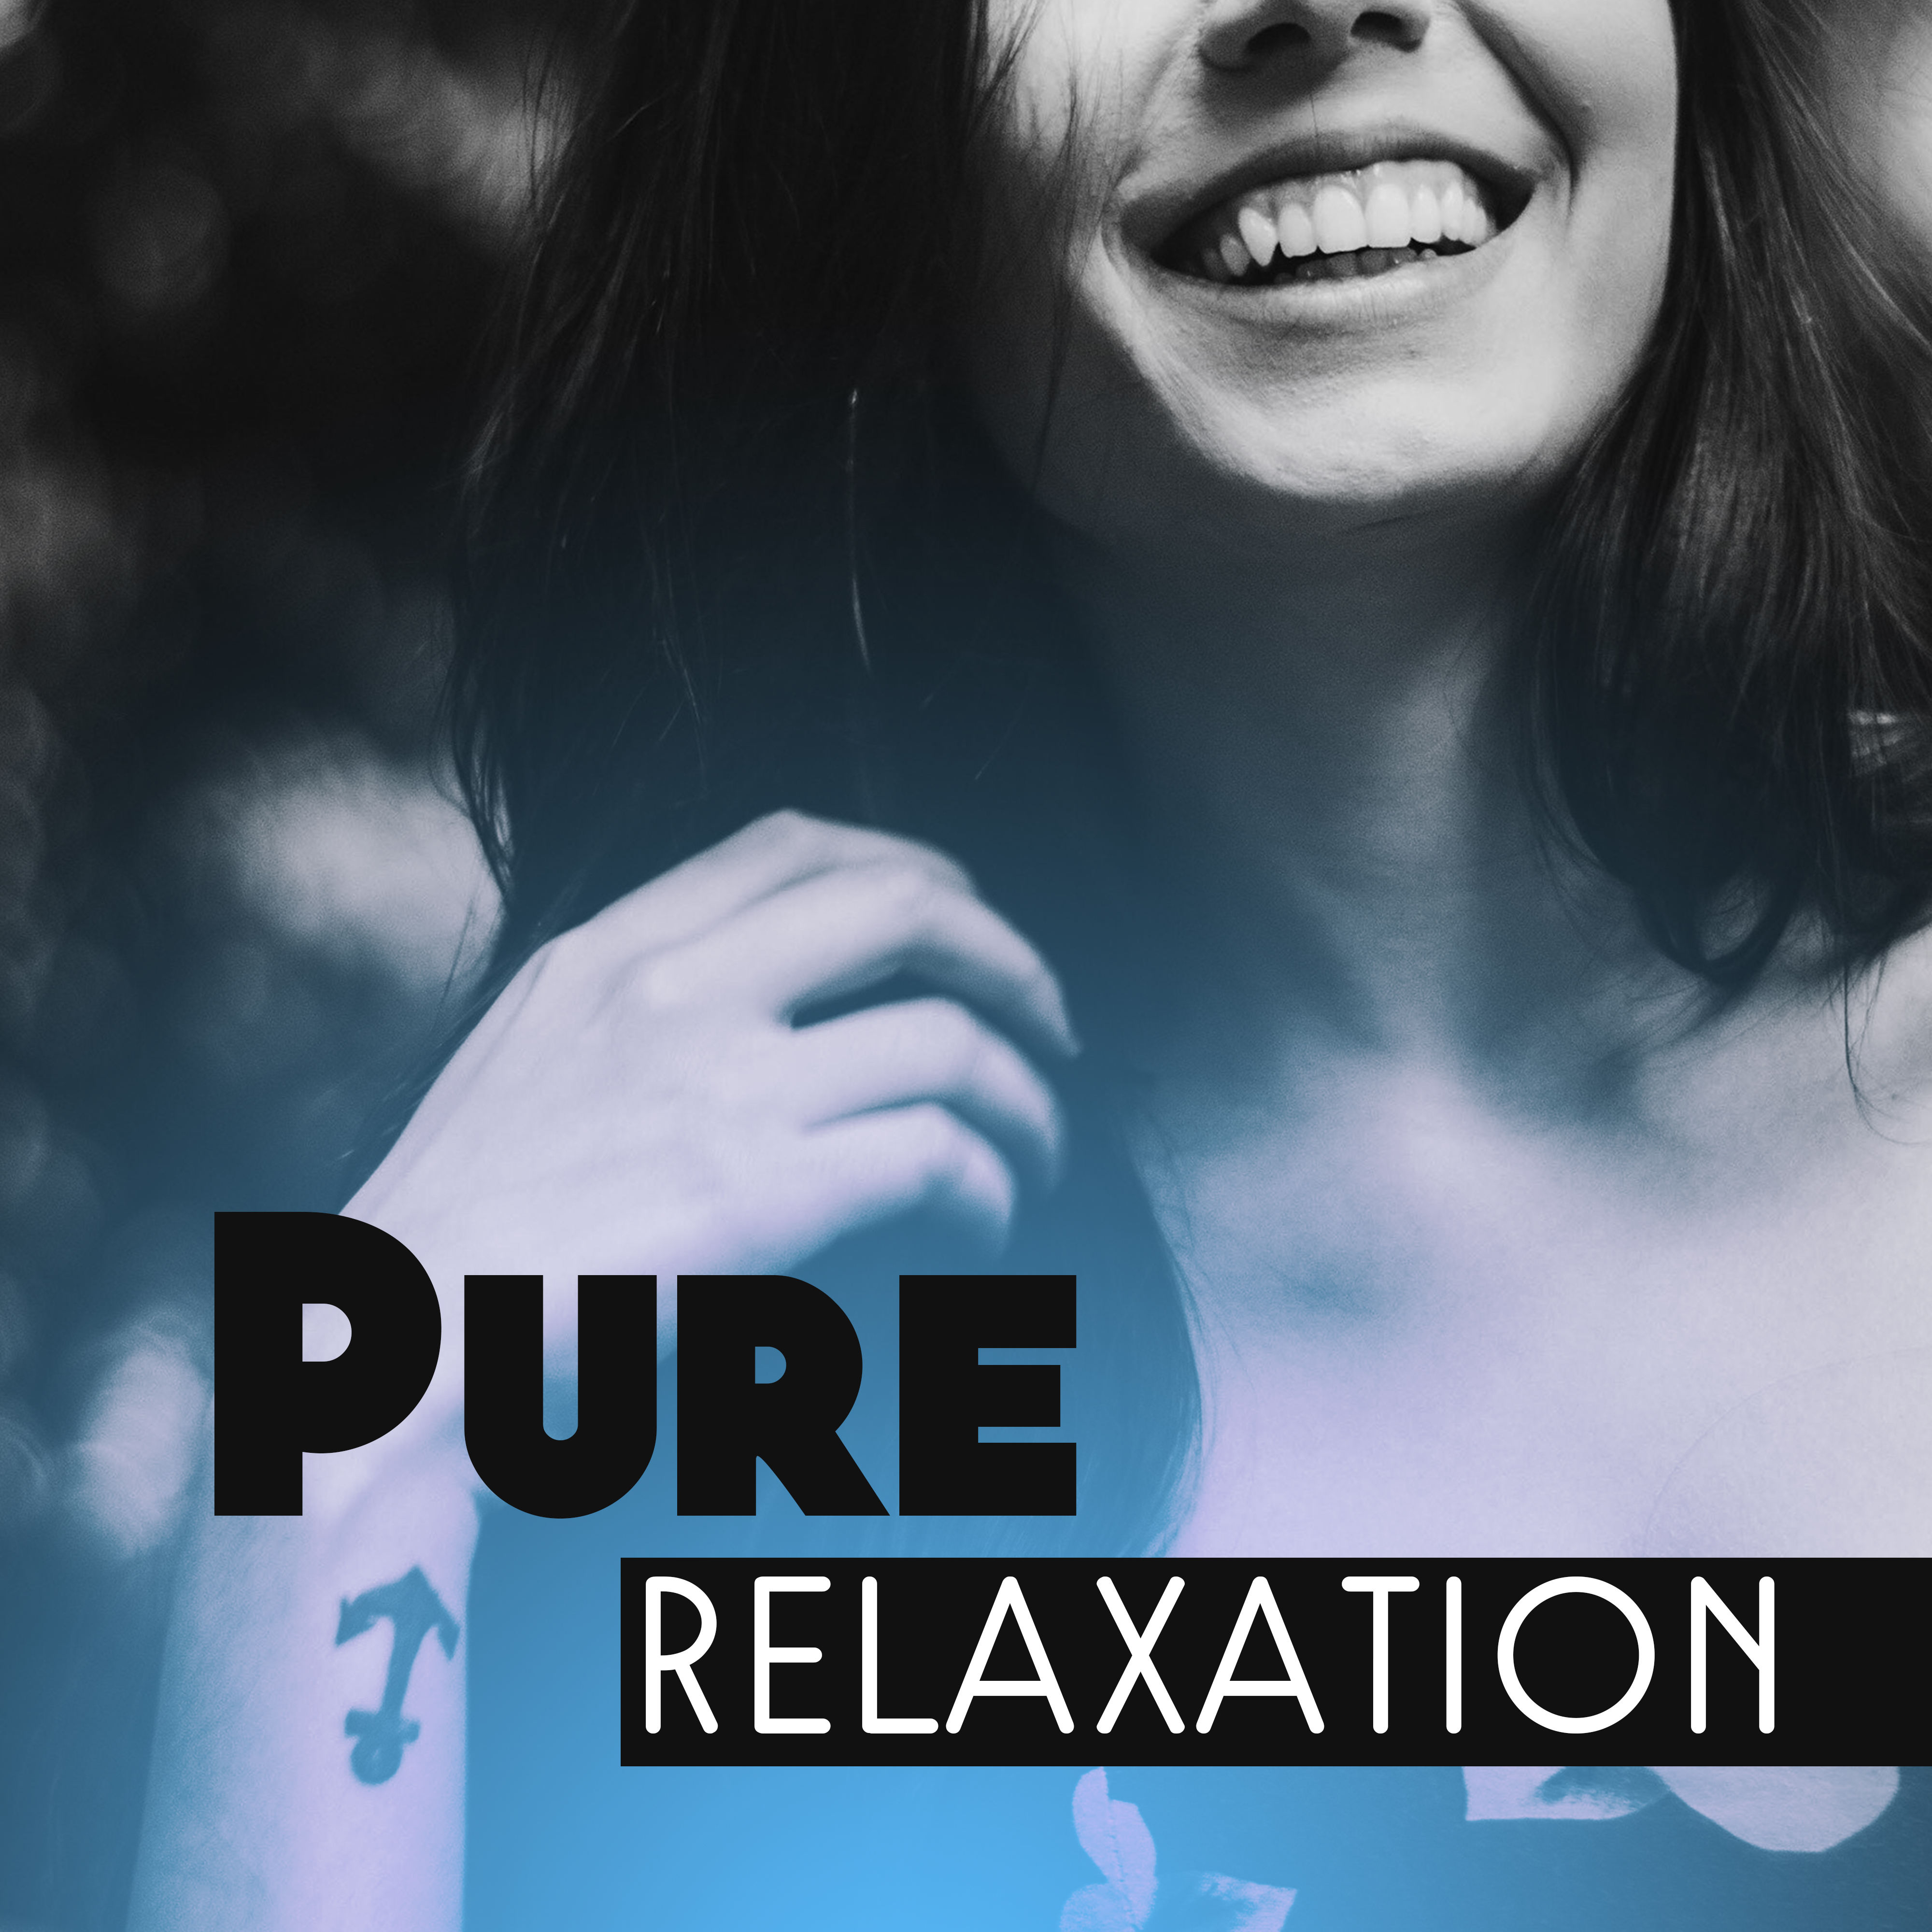 Pure Relaxation  Soothing Melodies to Rest, New Age, Inner Harmony, Calming Melodies Reduce Stress, Zen